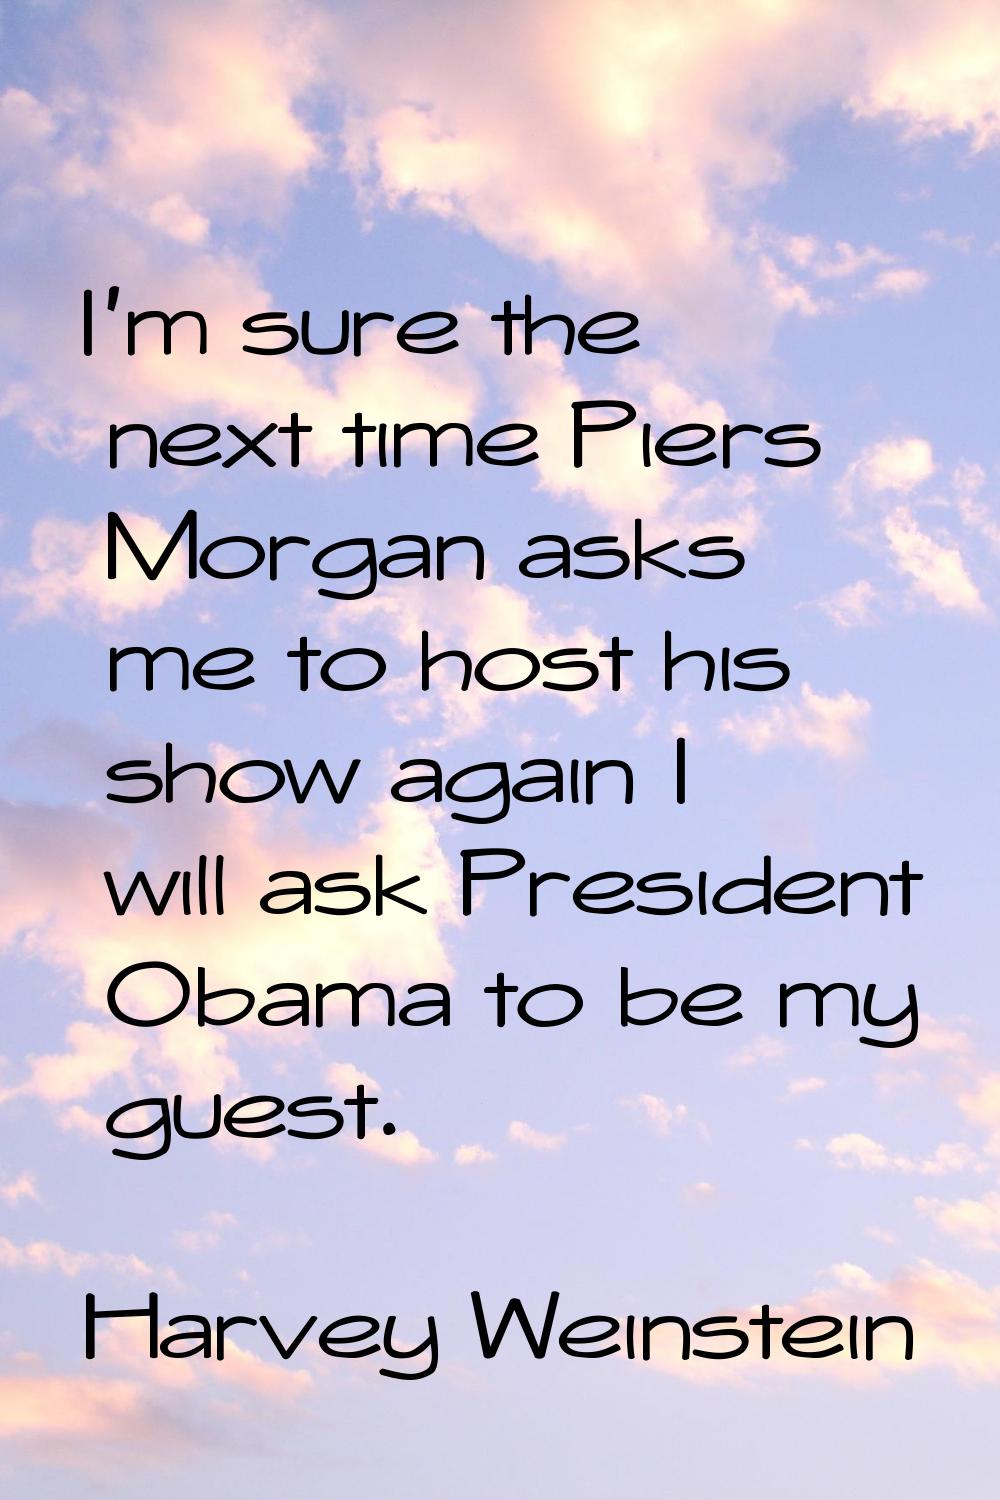 I'm sure the next time Piers Morgan asks me to host his show again I will ask President Obama to be